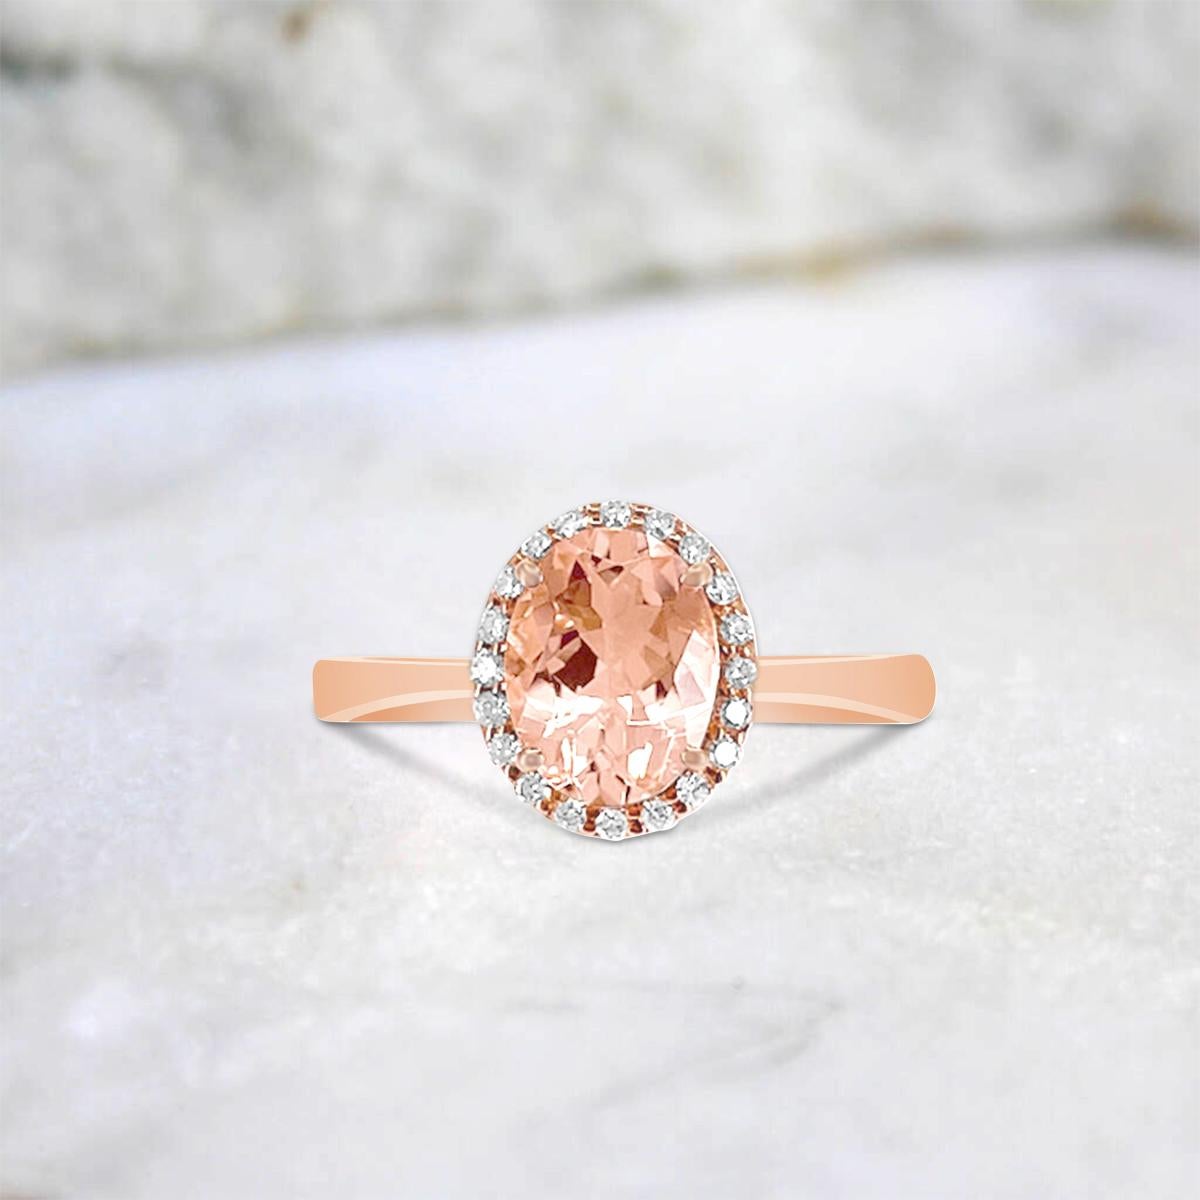 The Marvelous 8X6mm Morganite Gemstone On This Ring Is Bold And Eye-Catching With Diamonds.  It Is Set On 14K Rose Gold Make, Beautiful Piece Of Craftsmanship With Classic Velvety And Modern Look. 

Style# TS1074MOR
Morganite: Oval 8x6mm